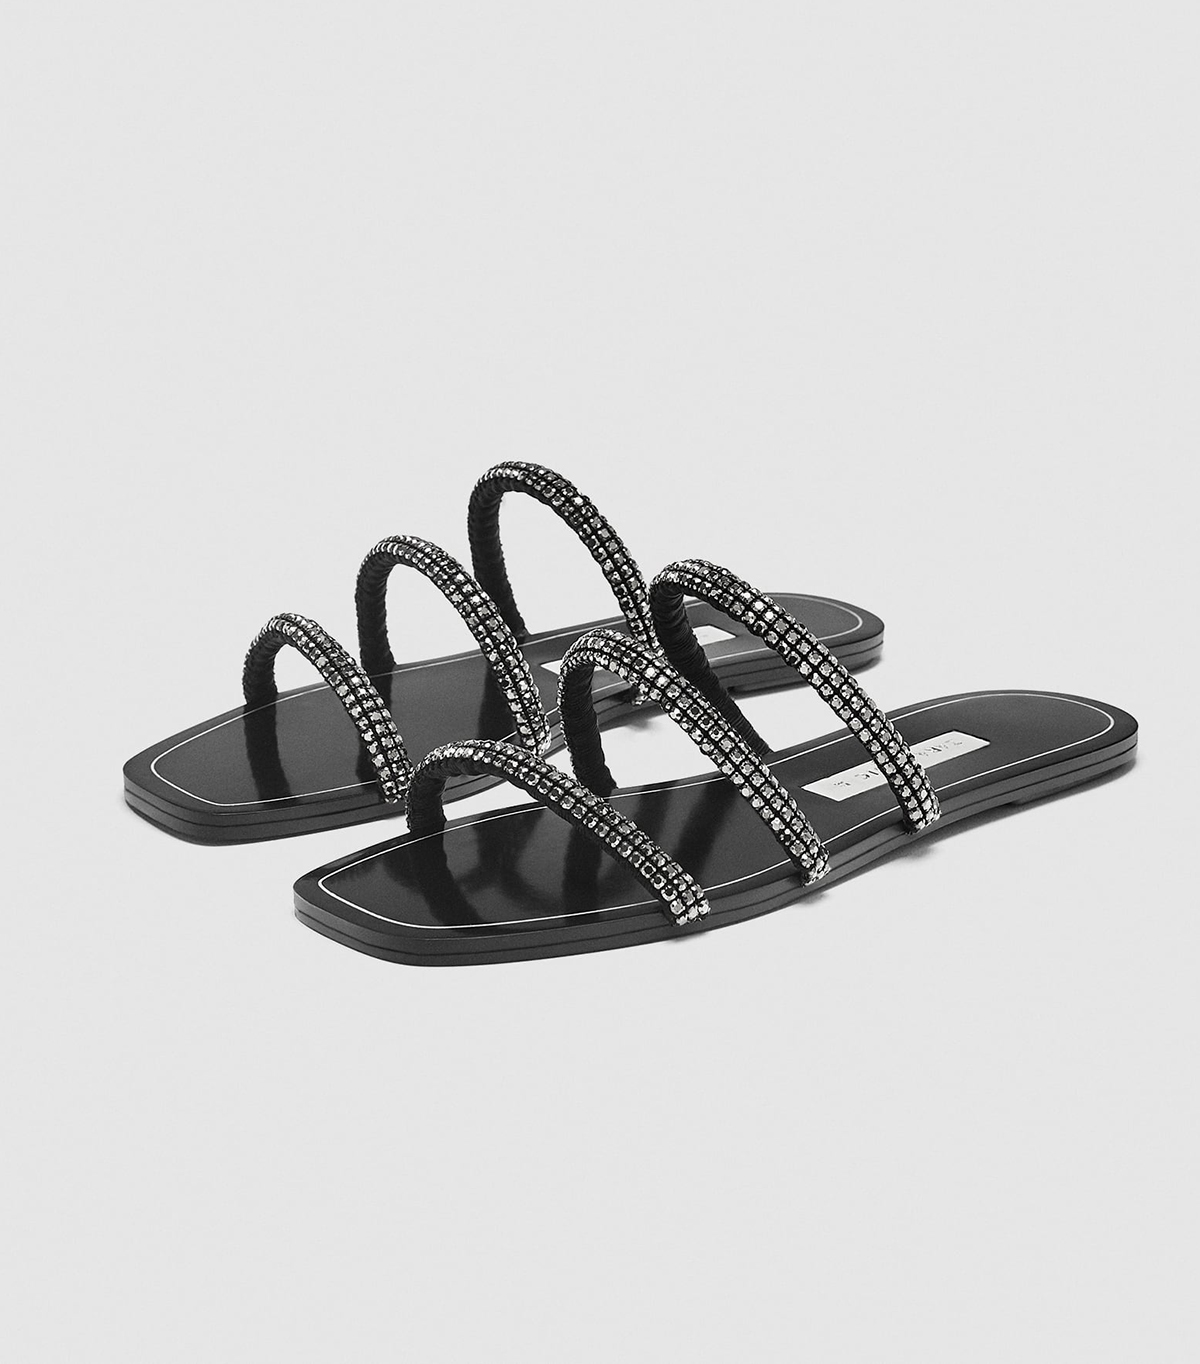 The Zara Sandals the Fashion Crowd Has Discovered | Who What Wear